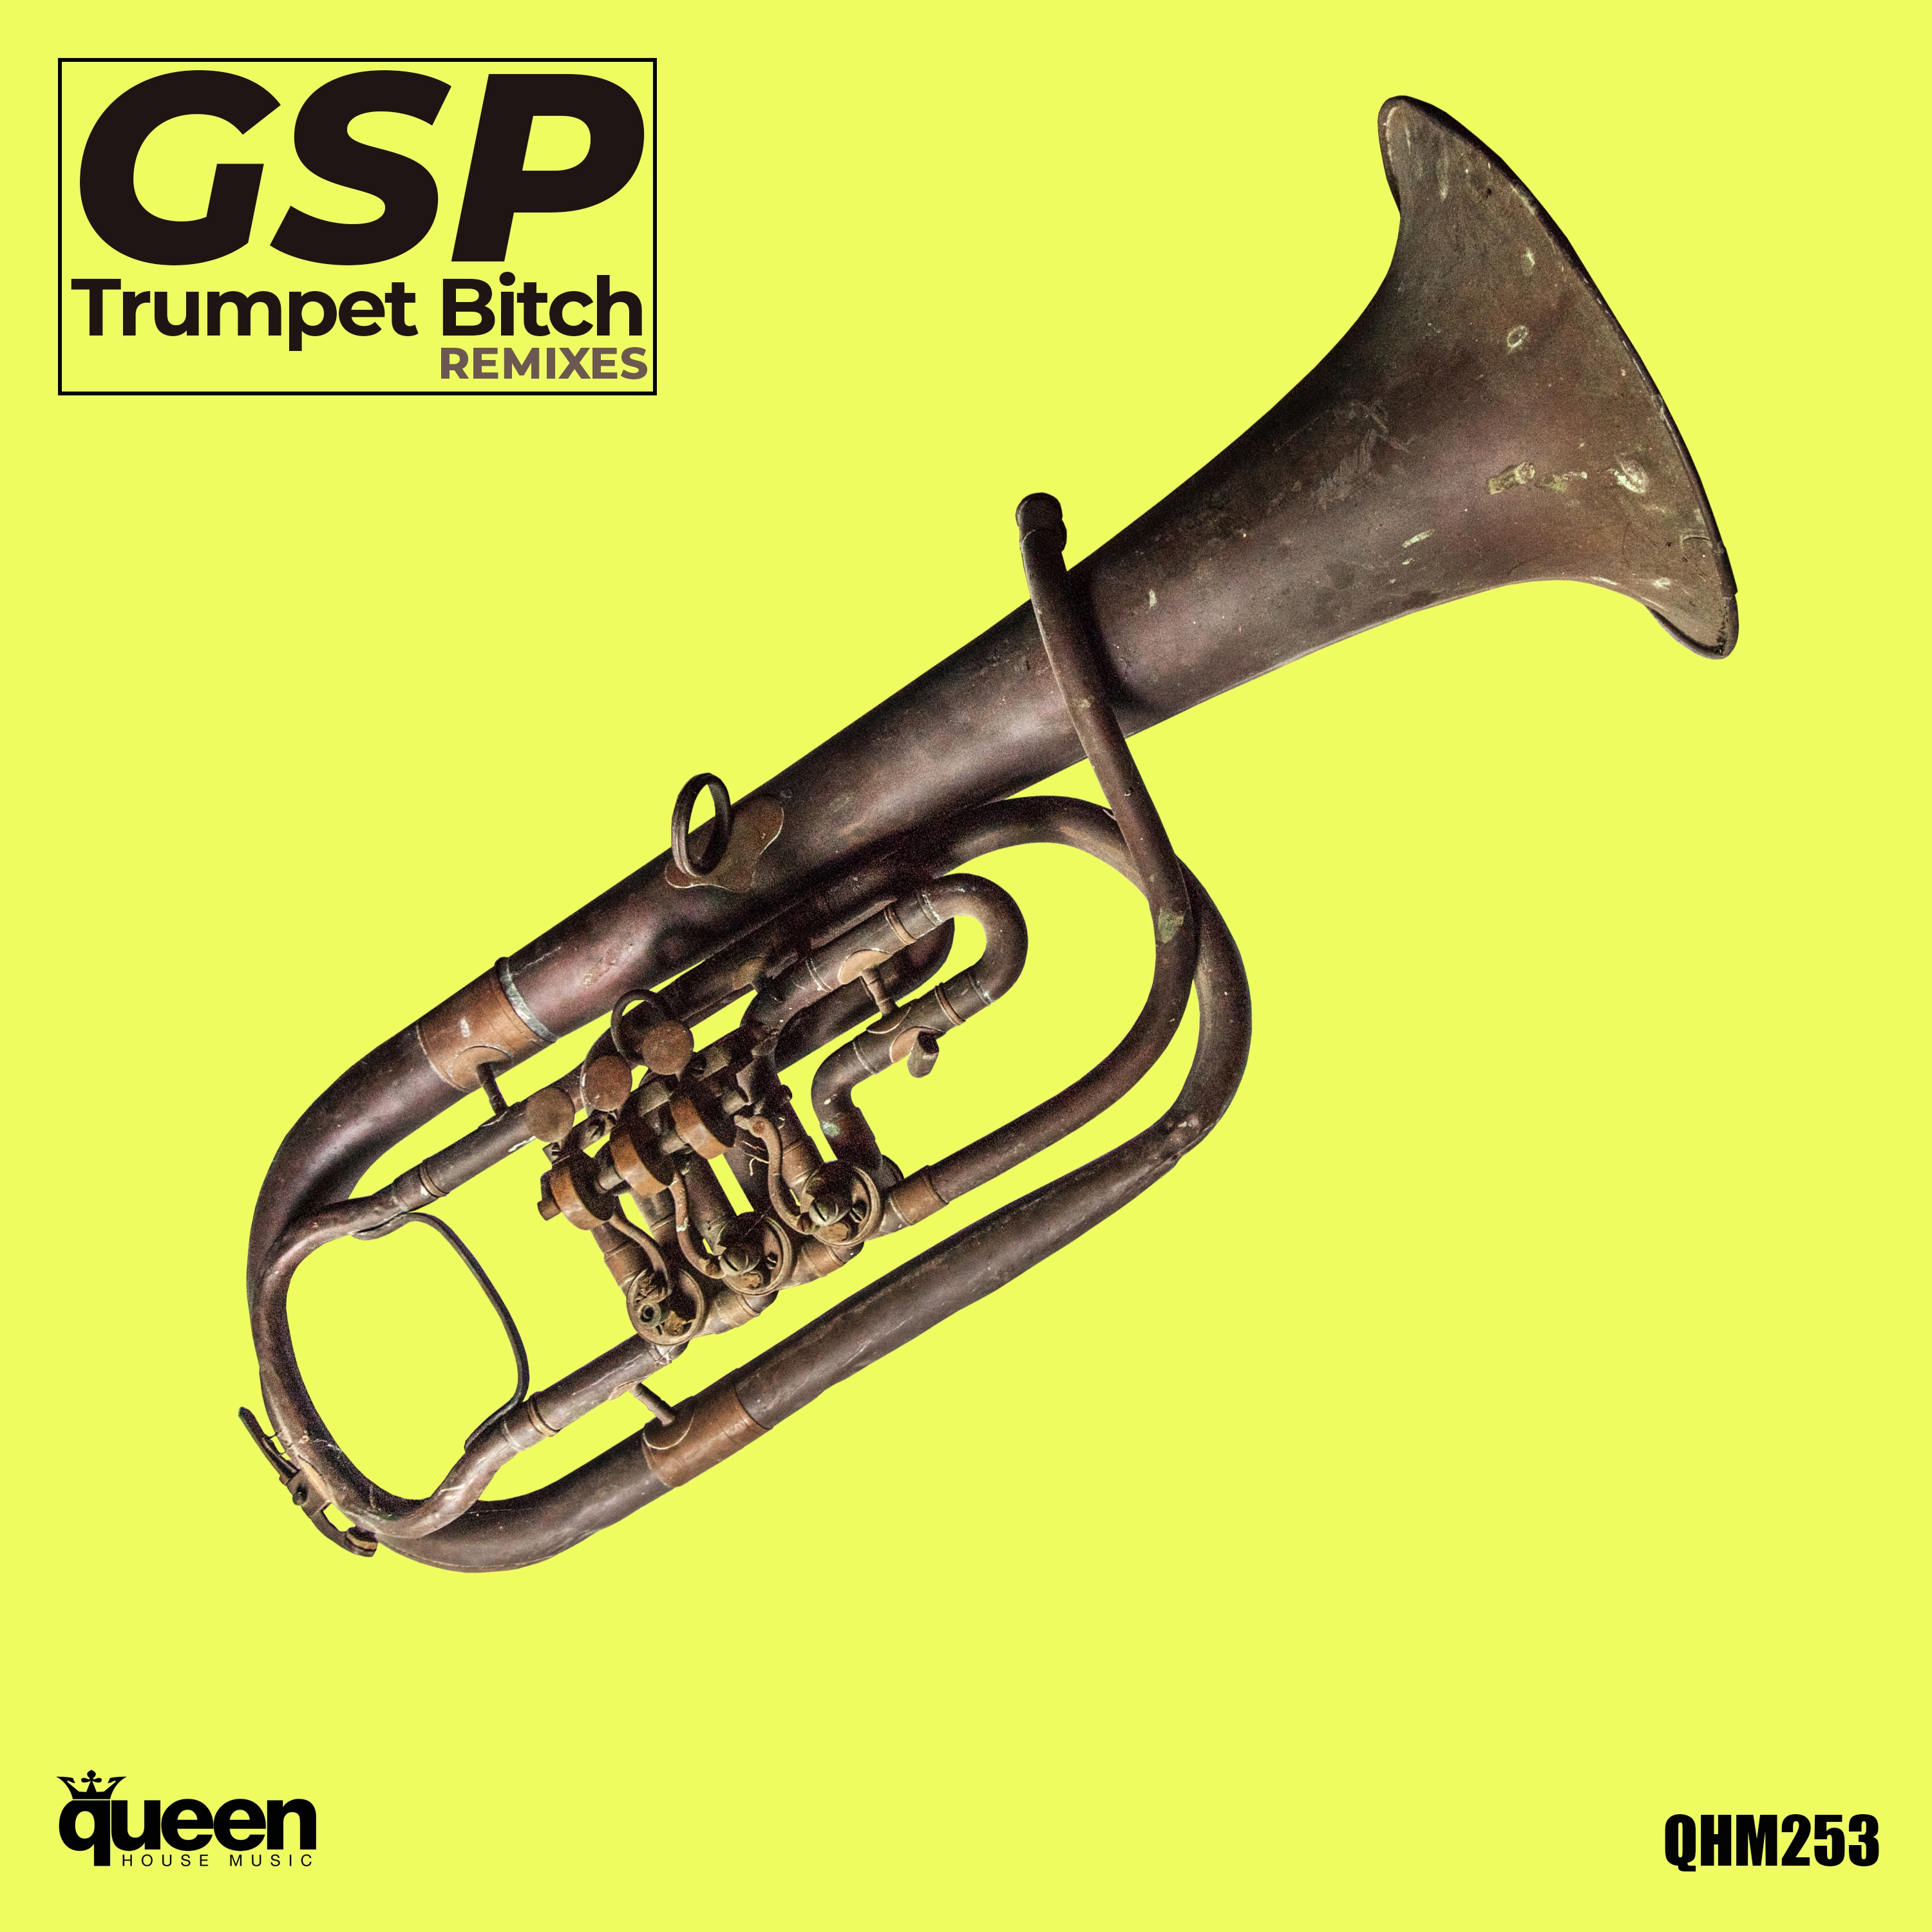 Trumpet ***** (House of Labs Remix)